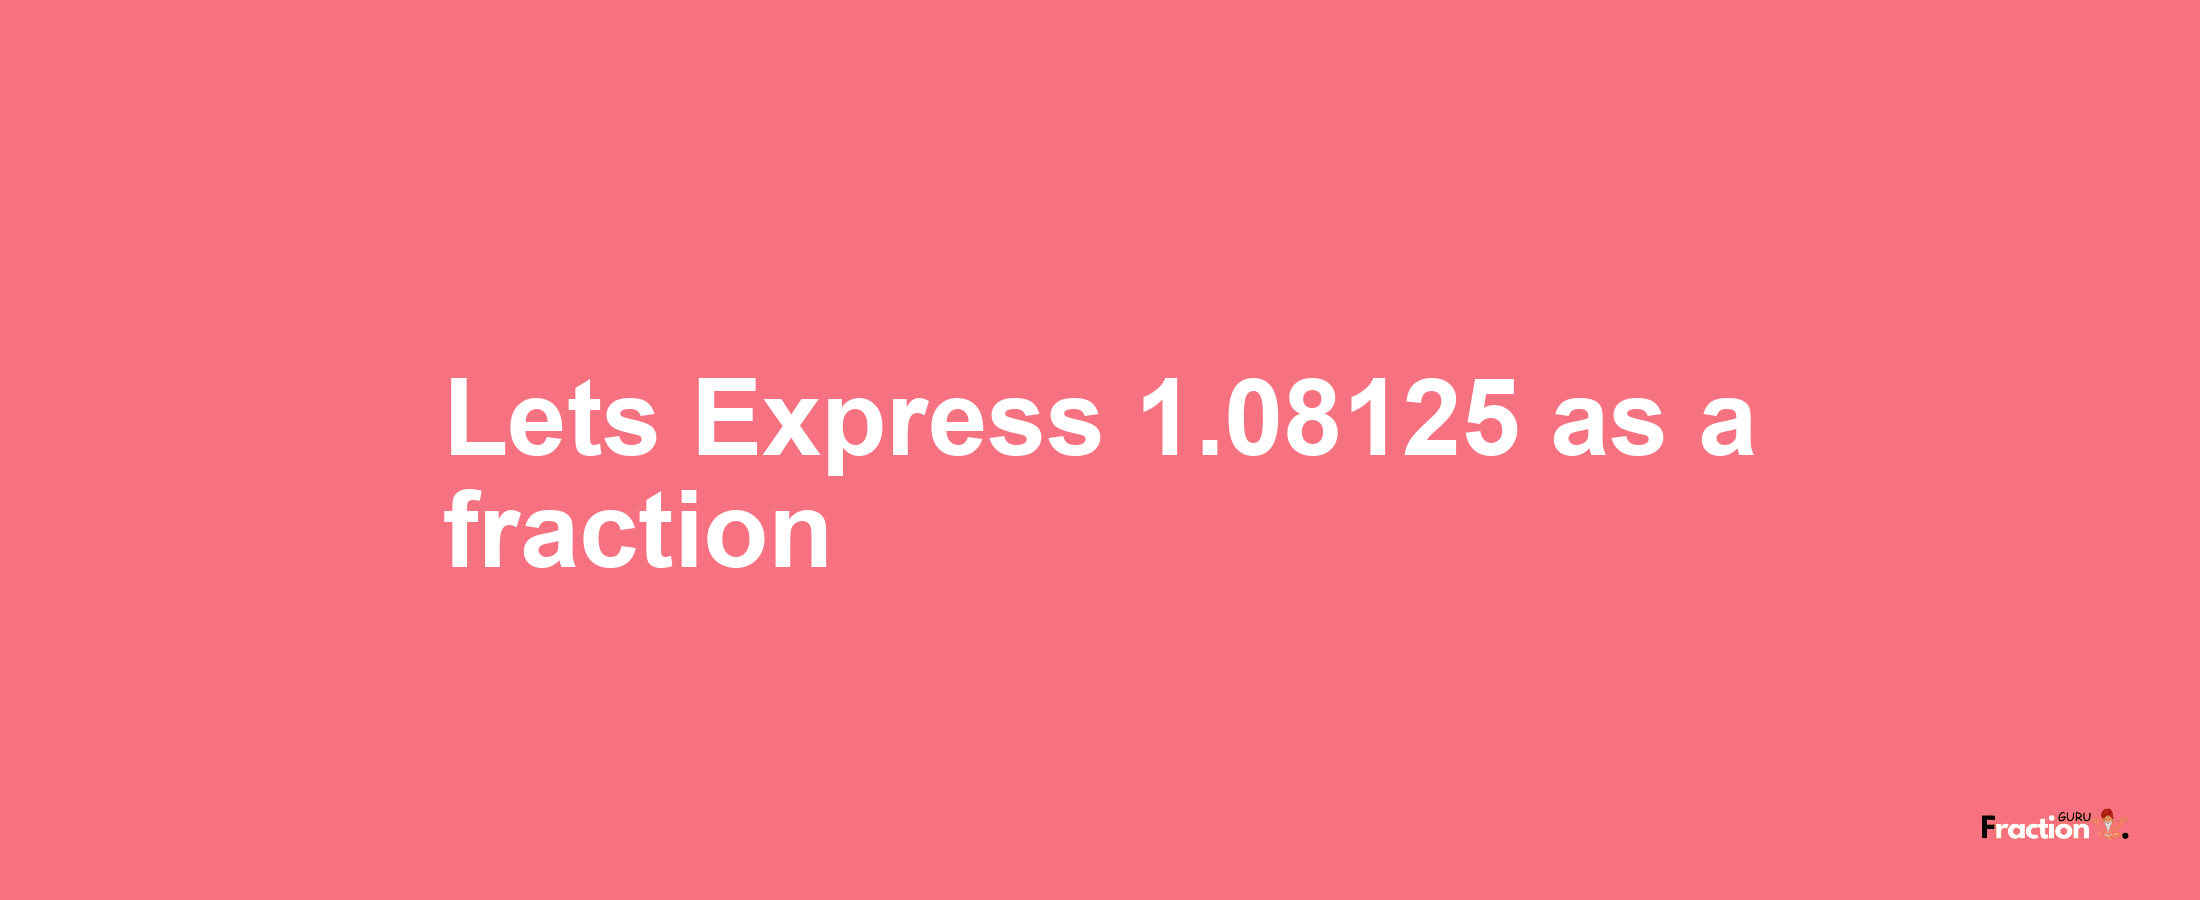 Lets Express 1.08125 as afraction